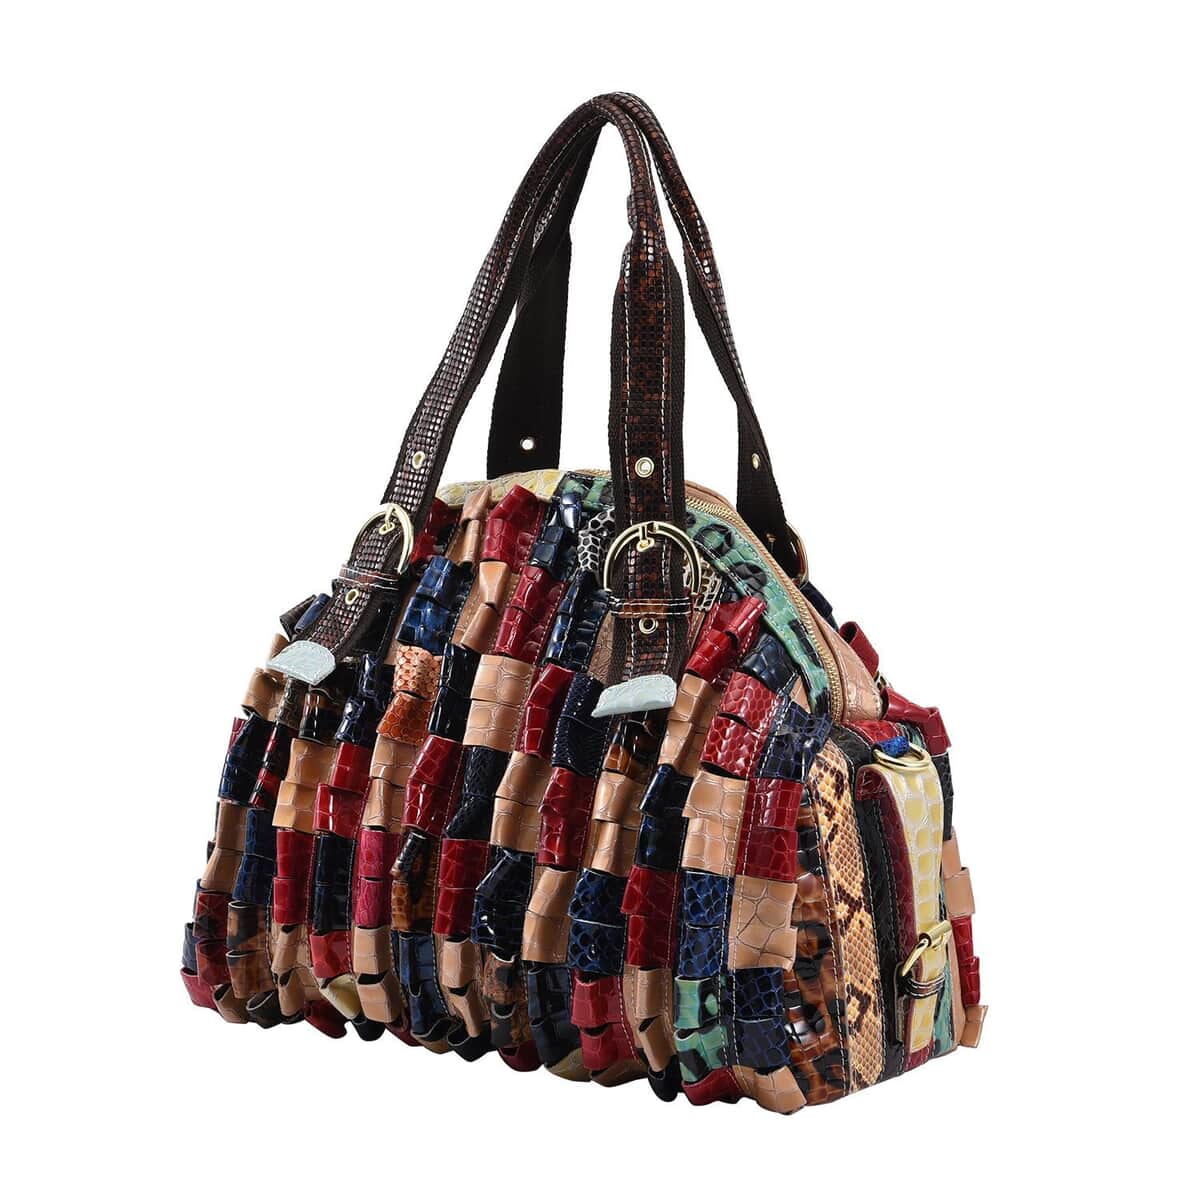 CHAOS Rainbow Color Genuine Leather Stripe & 3D Flower Pattern Convertible Tote Bag (15.75"x8.66"x12.2") with Long Shoulder Strap image number 6